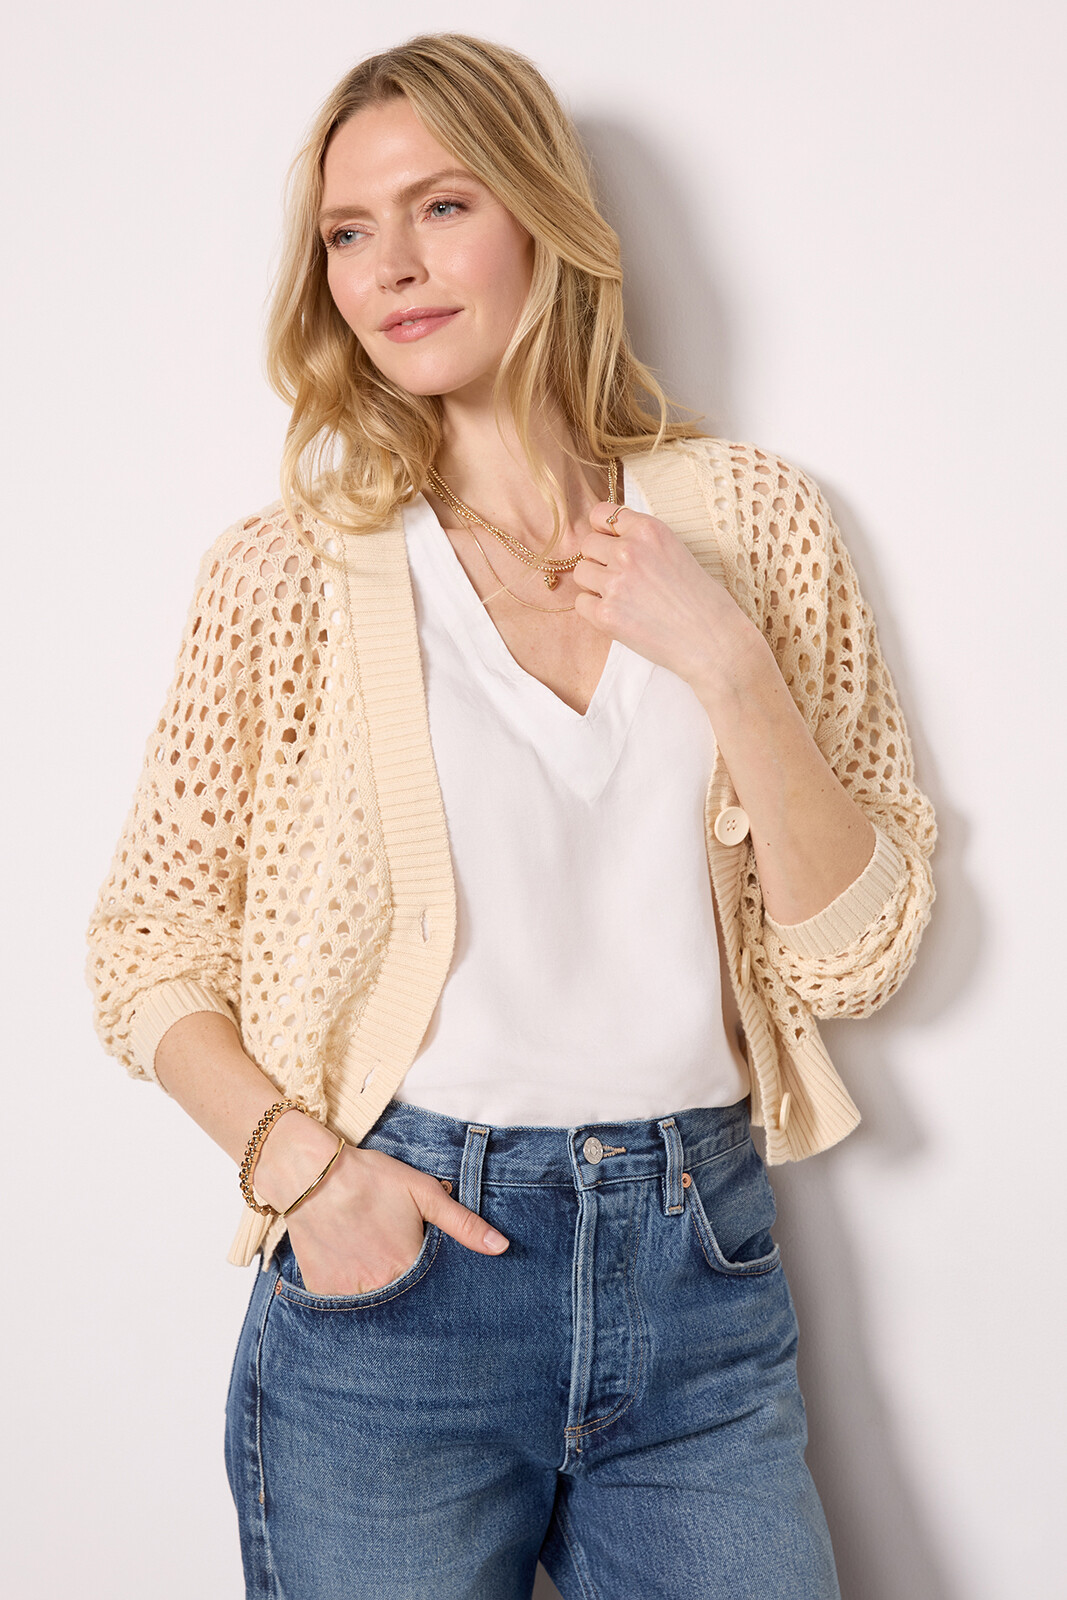 Sweaters, Cardigans & Pullovers for Women